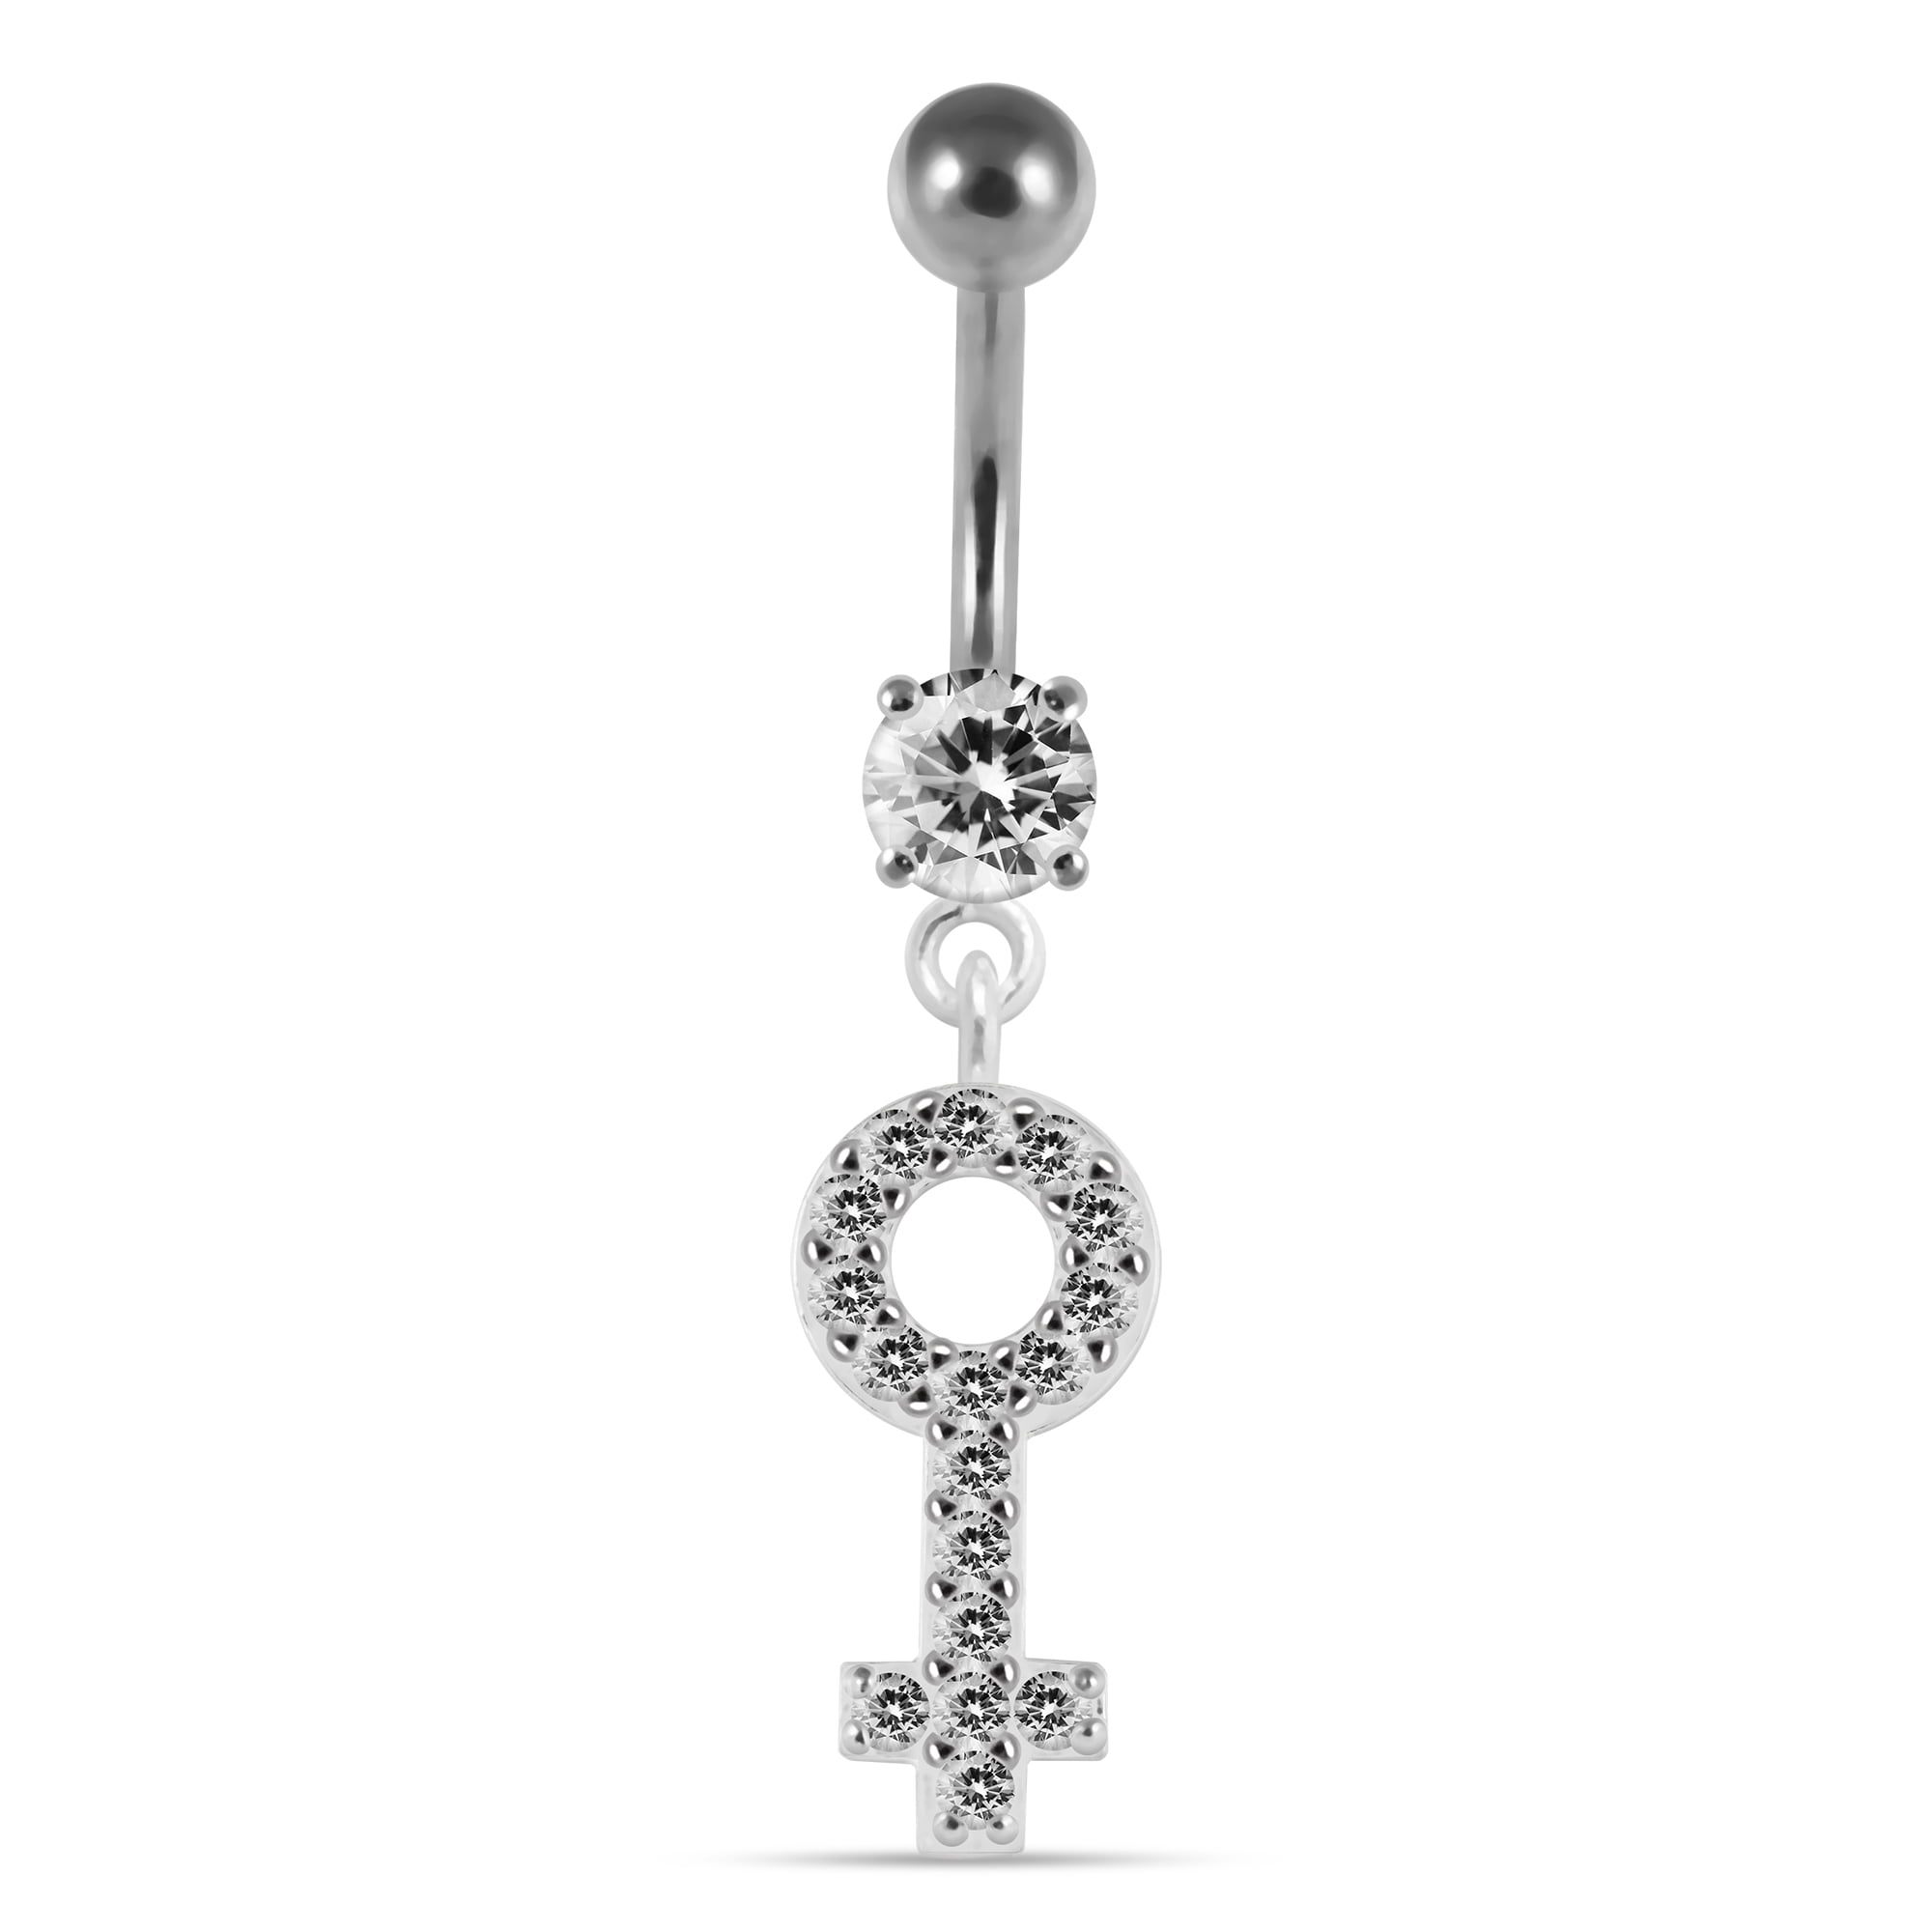 Rose Gold Plated Multi Clear Crystal Stone Tree of Life 925 Sterling Silver Belly Button Piercing Ring